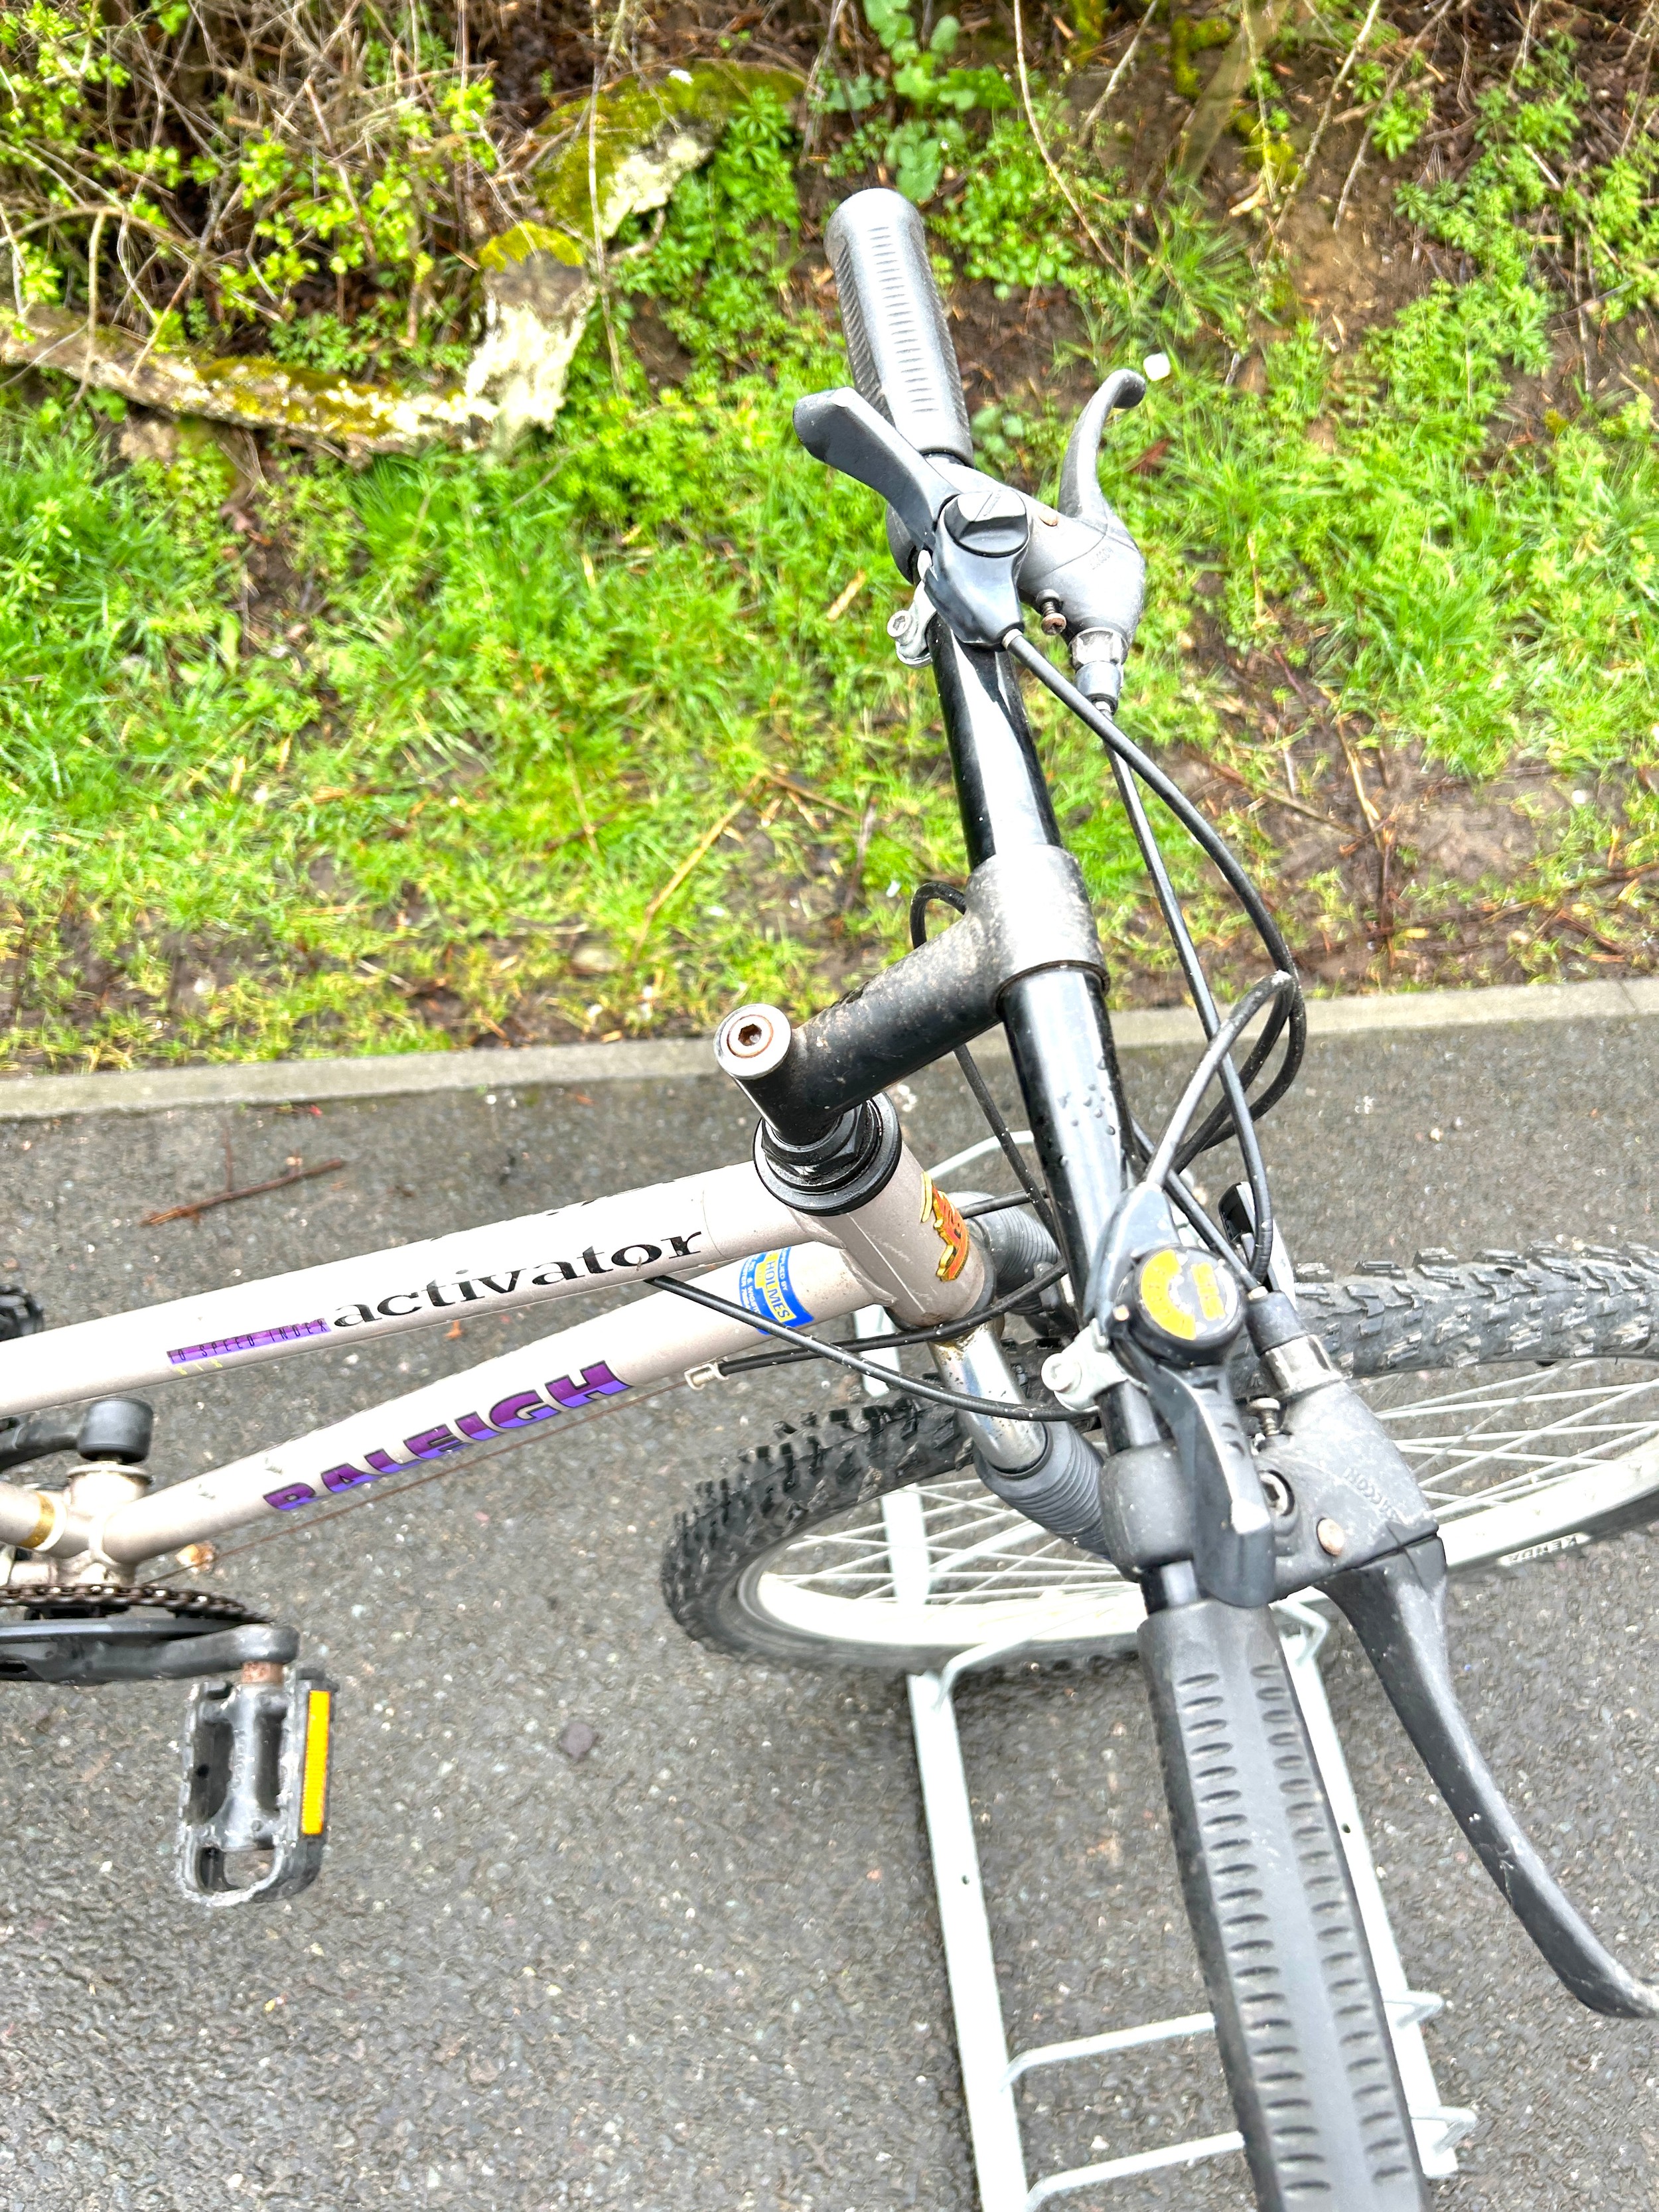 Raleigh activator ladies mountain bike, over all good condition, working brakes and gears - Image 3 of 4